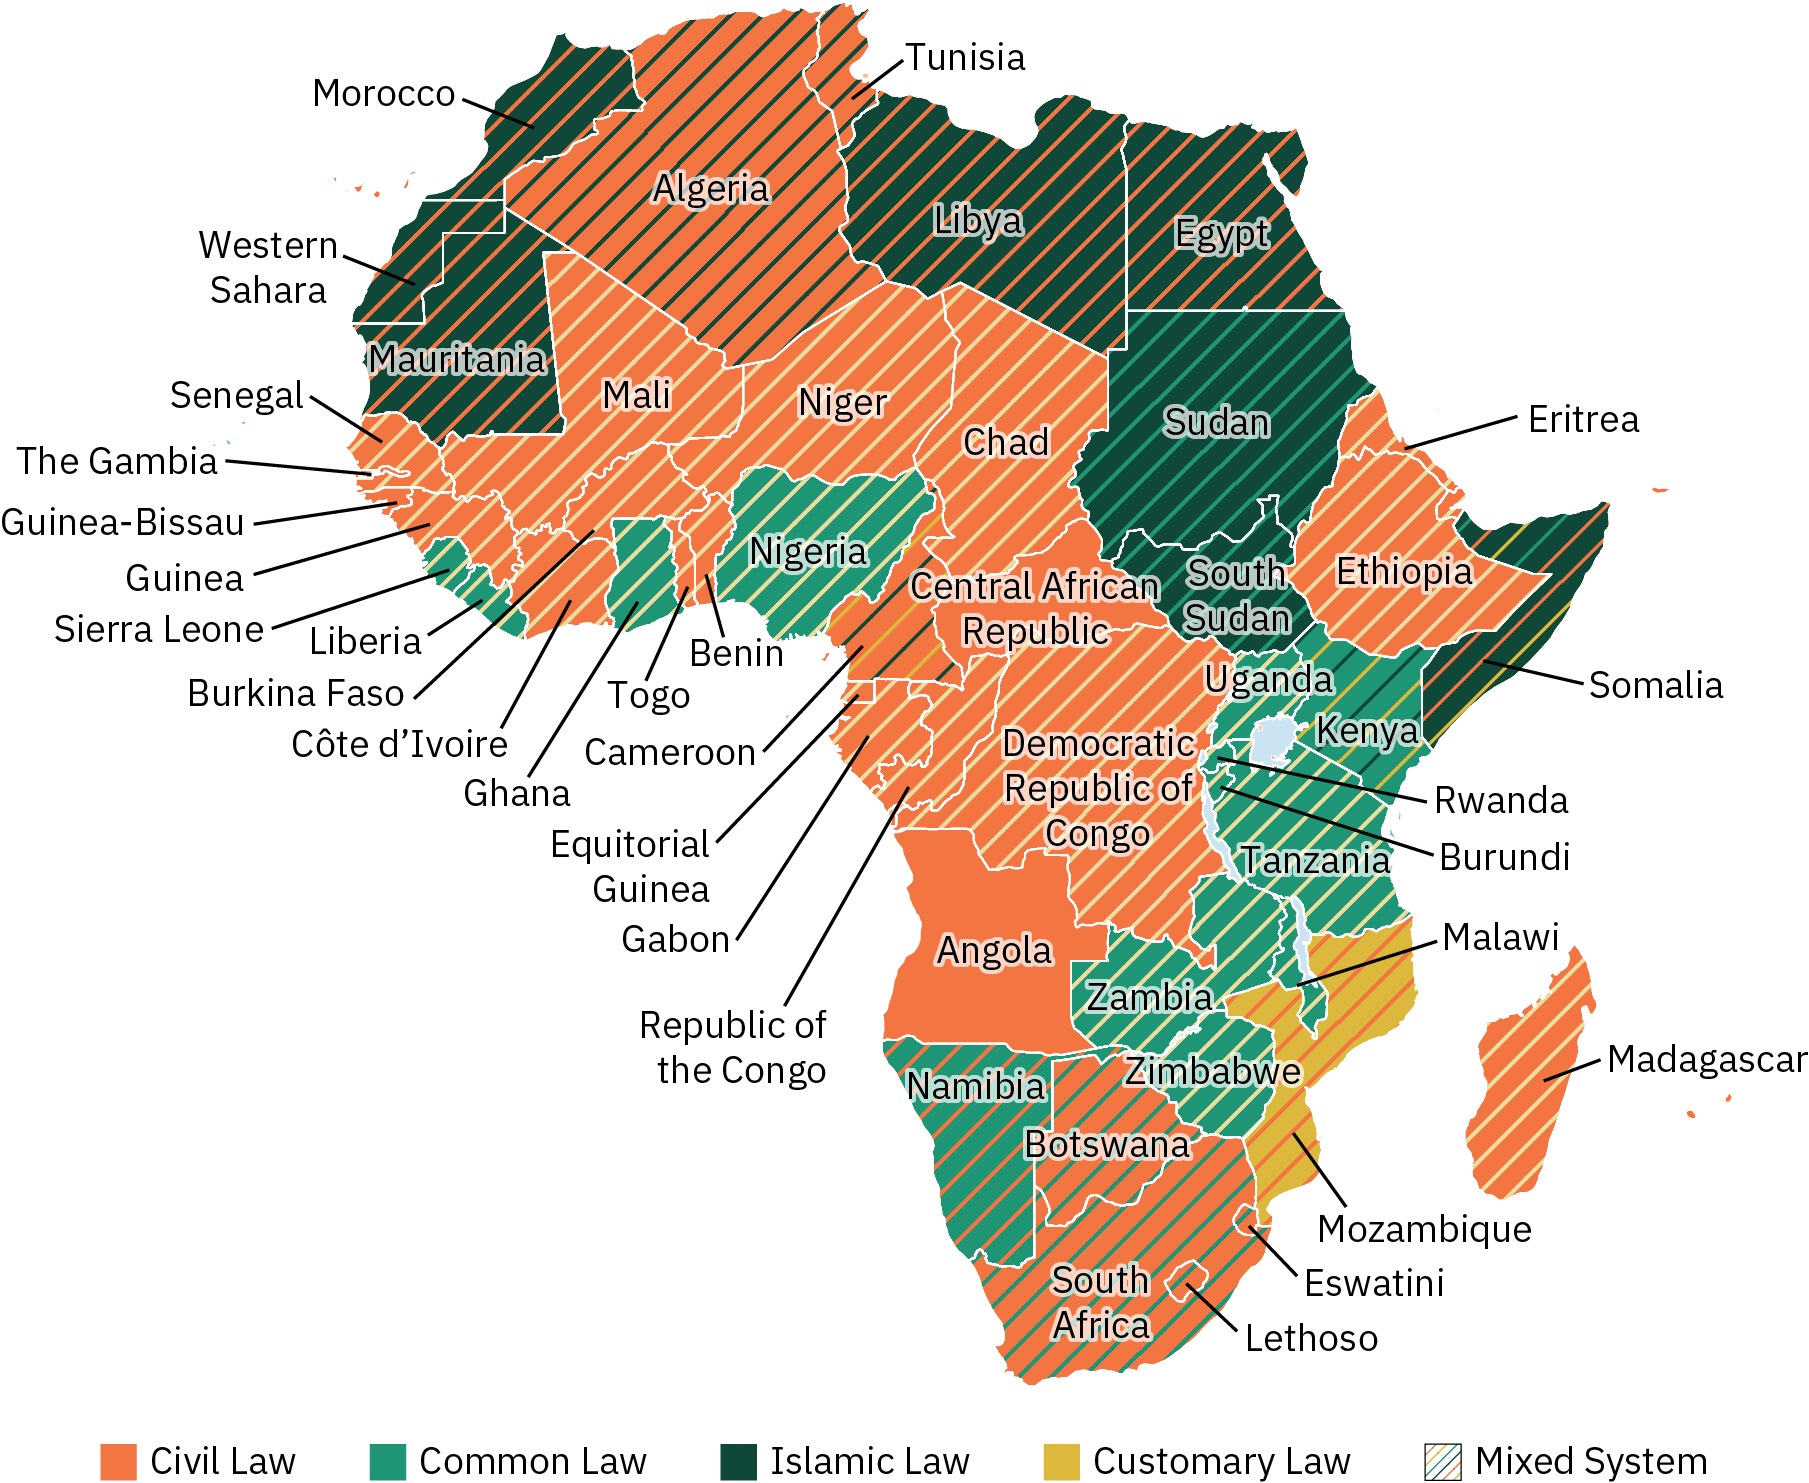 A map shows the various types of legal systems present in the different parts of Africa. While different types of legal systems are used in different countries throughout Africa, every country except for Angola uses a mixed system.